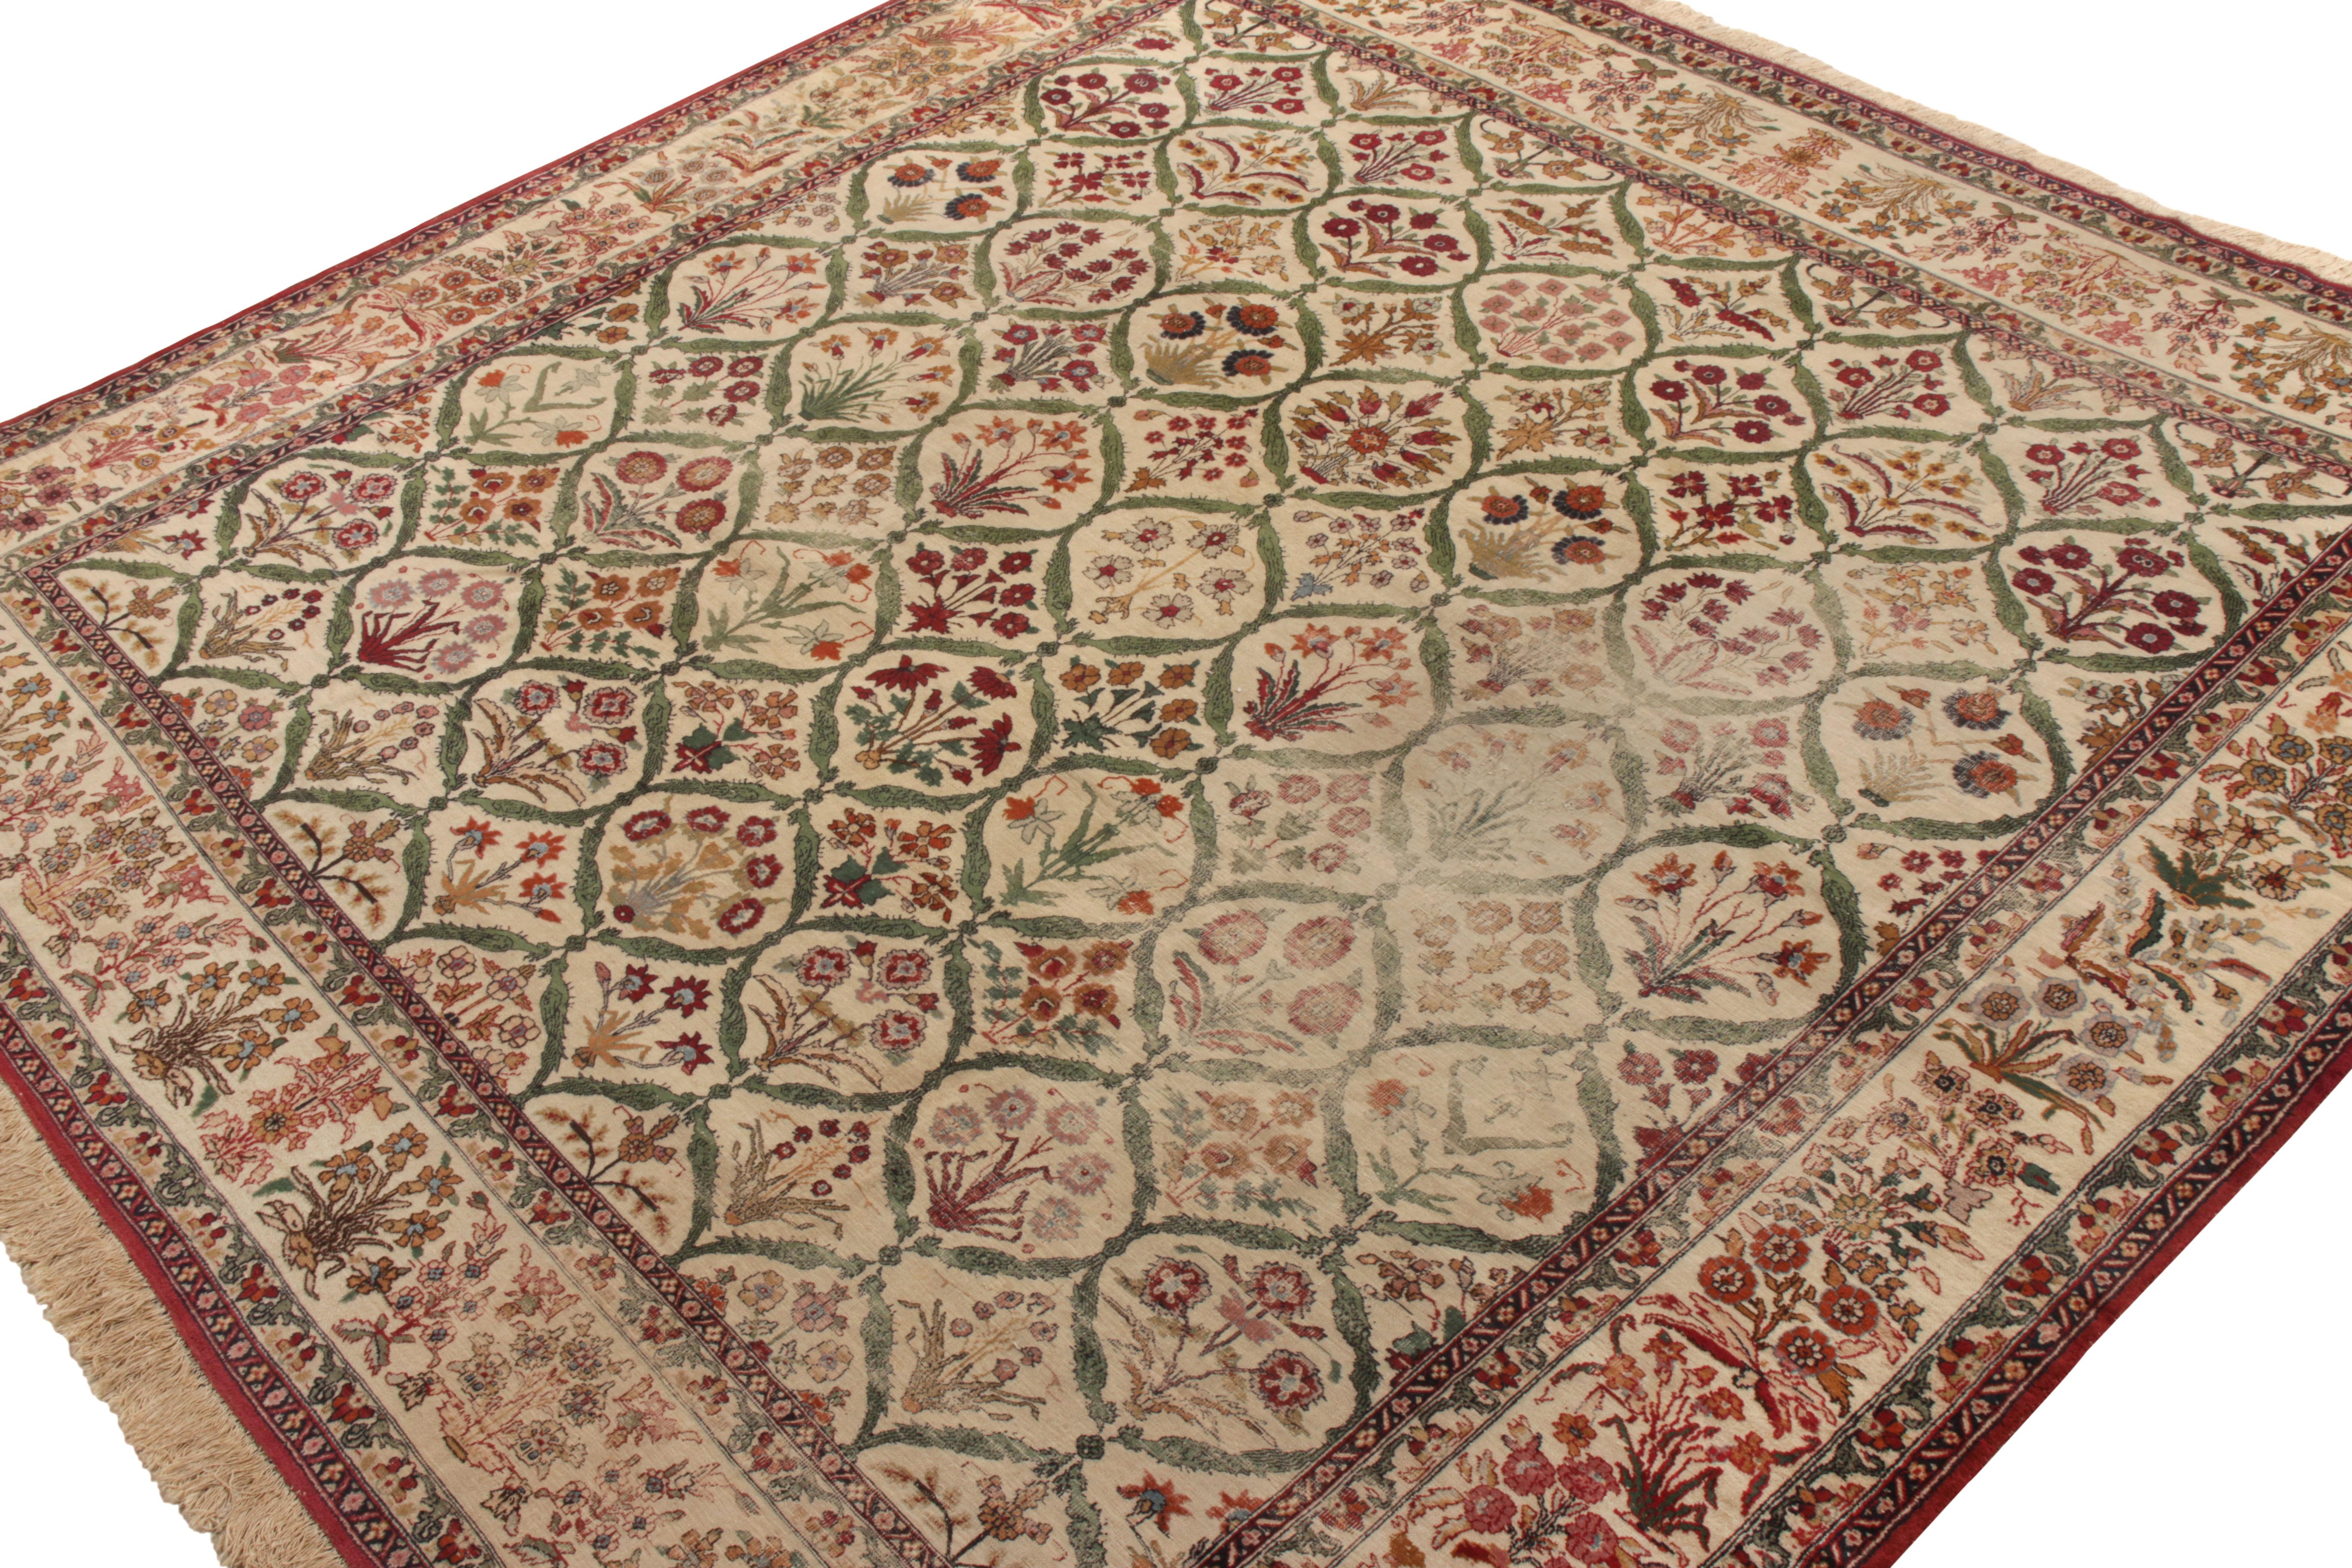 Other Hand-Knotted Antique Mogul Rug in Beige, Green Floral Pattern by Rug & Kilim For Sale